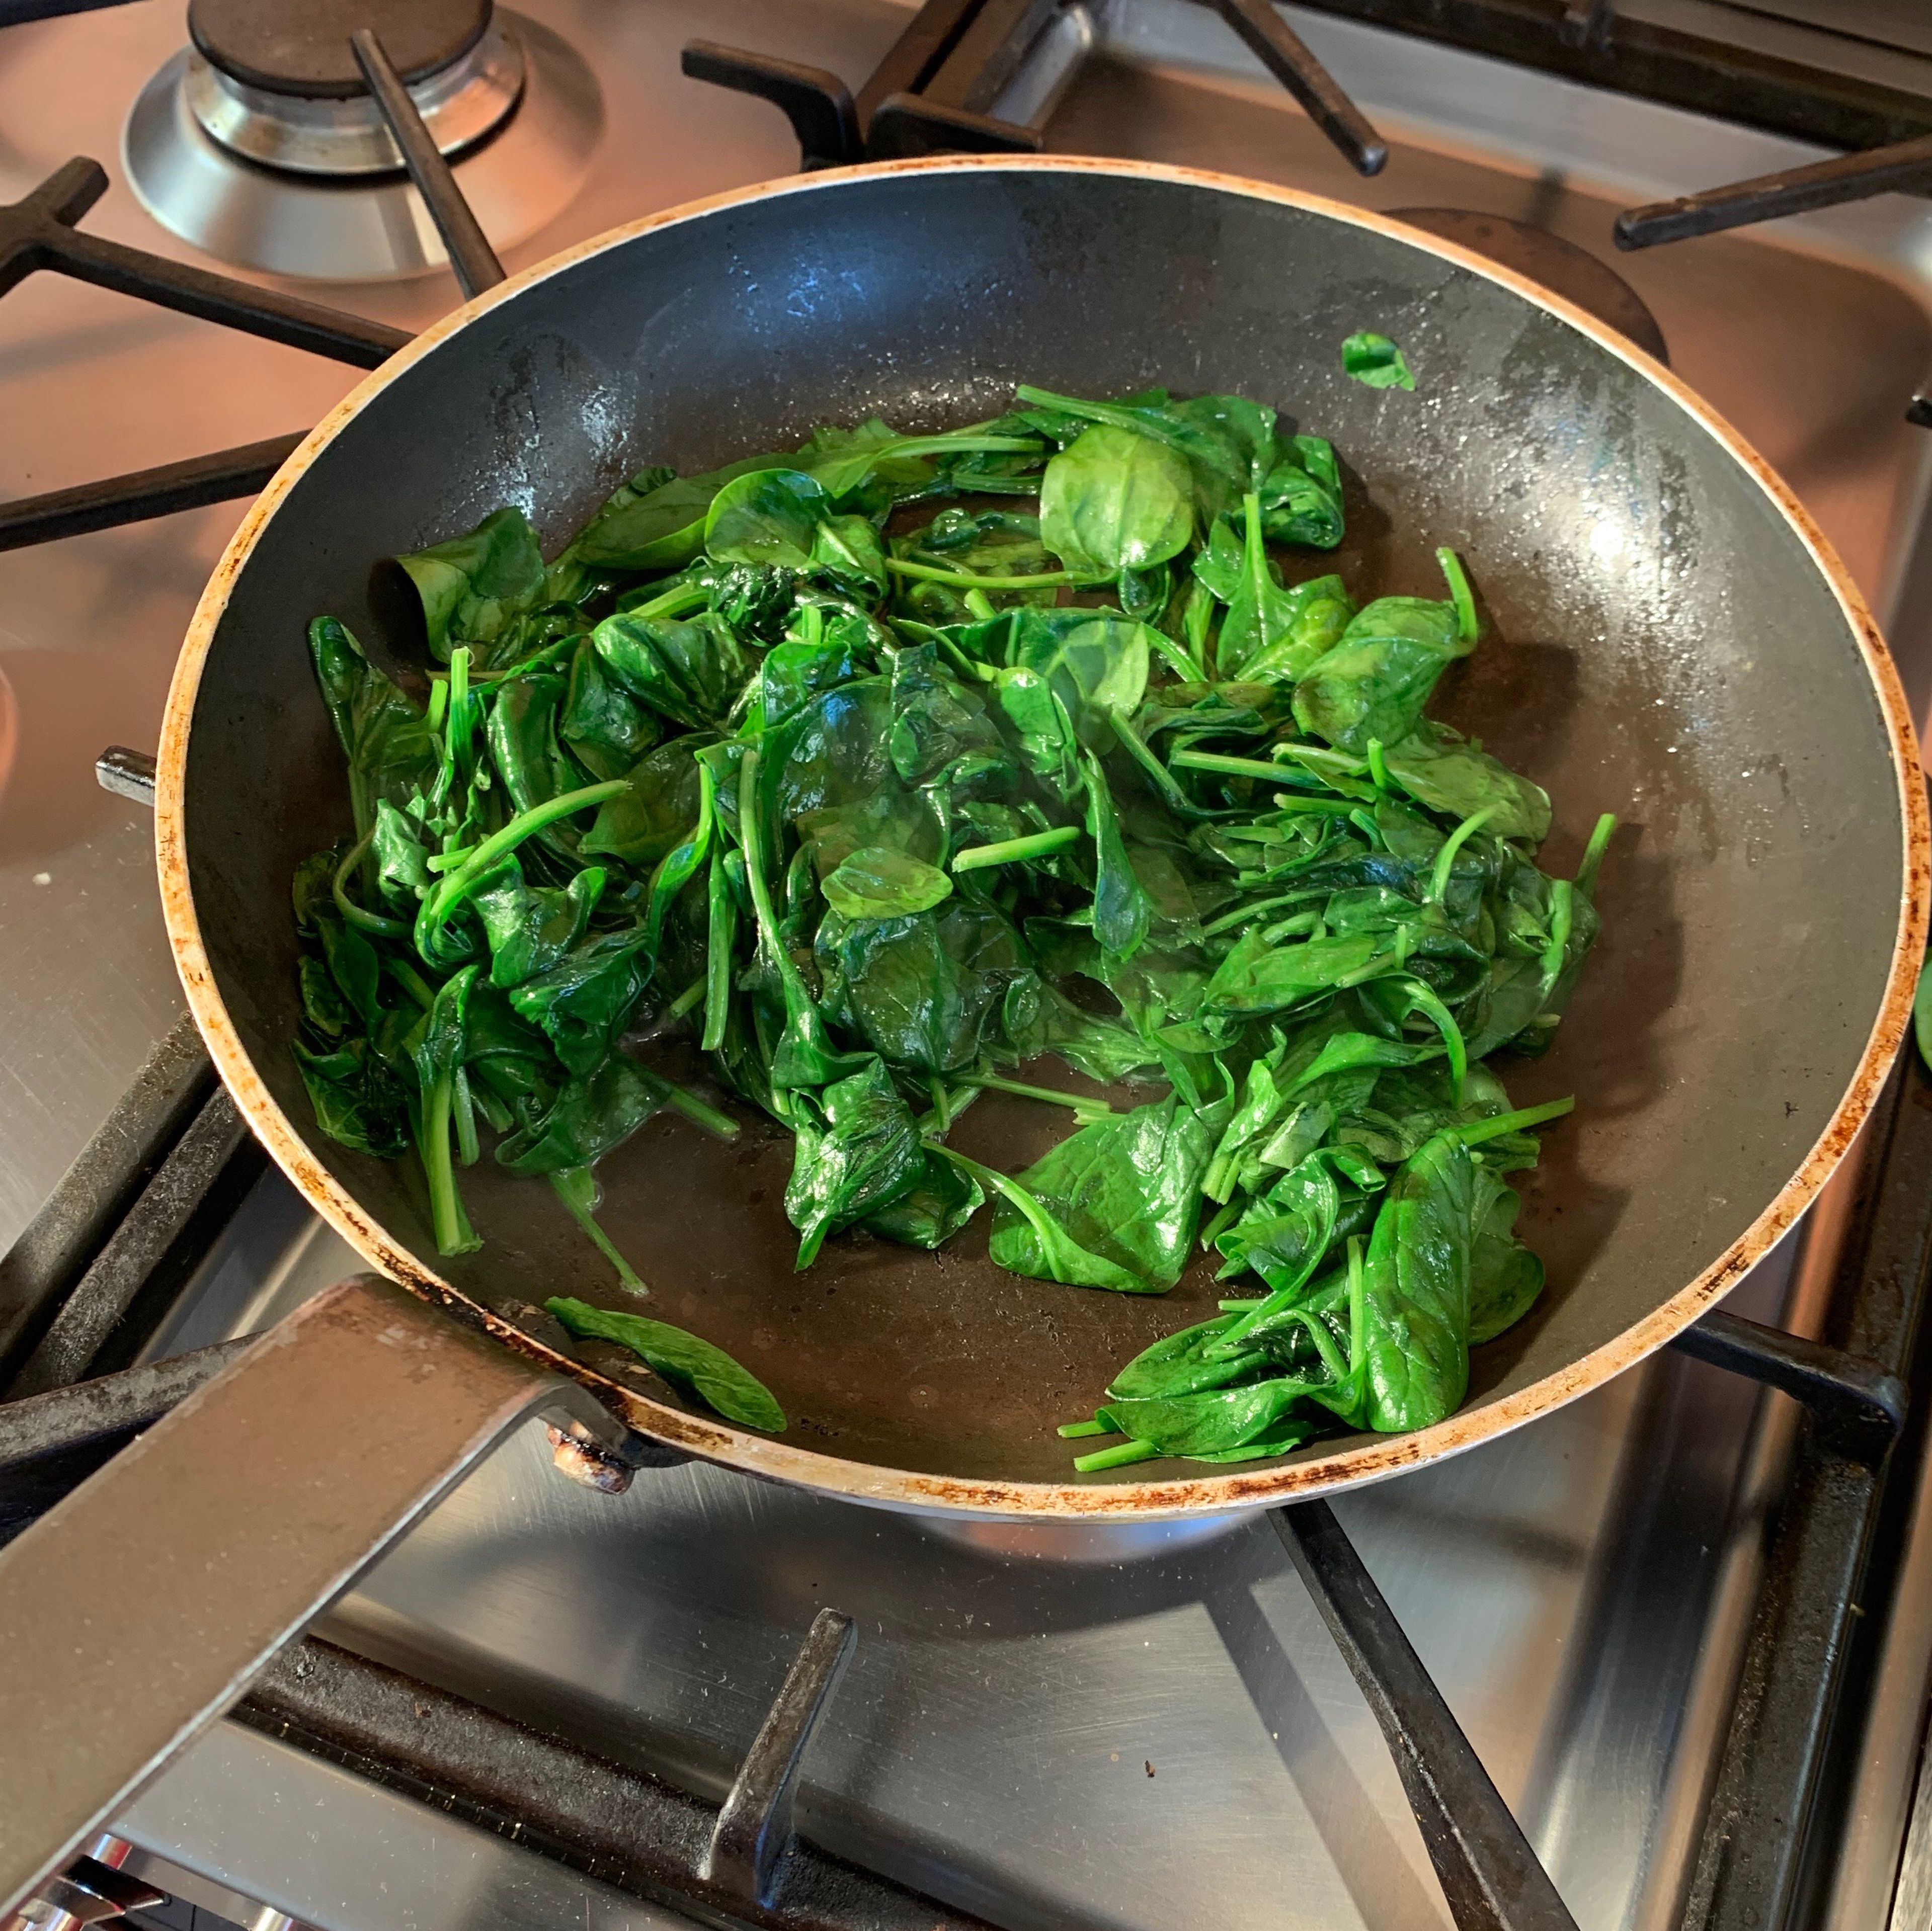 Melt the butter in a frying pan over a medium heat and then add the spinach and the grated nutmeg. Cook until wilted